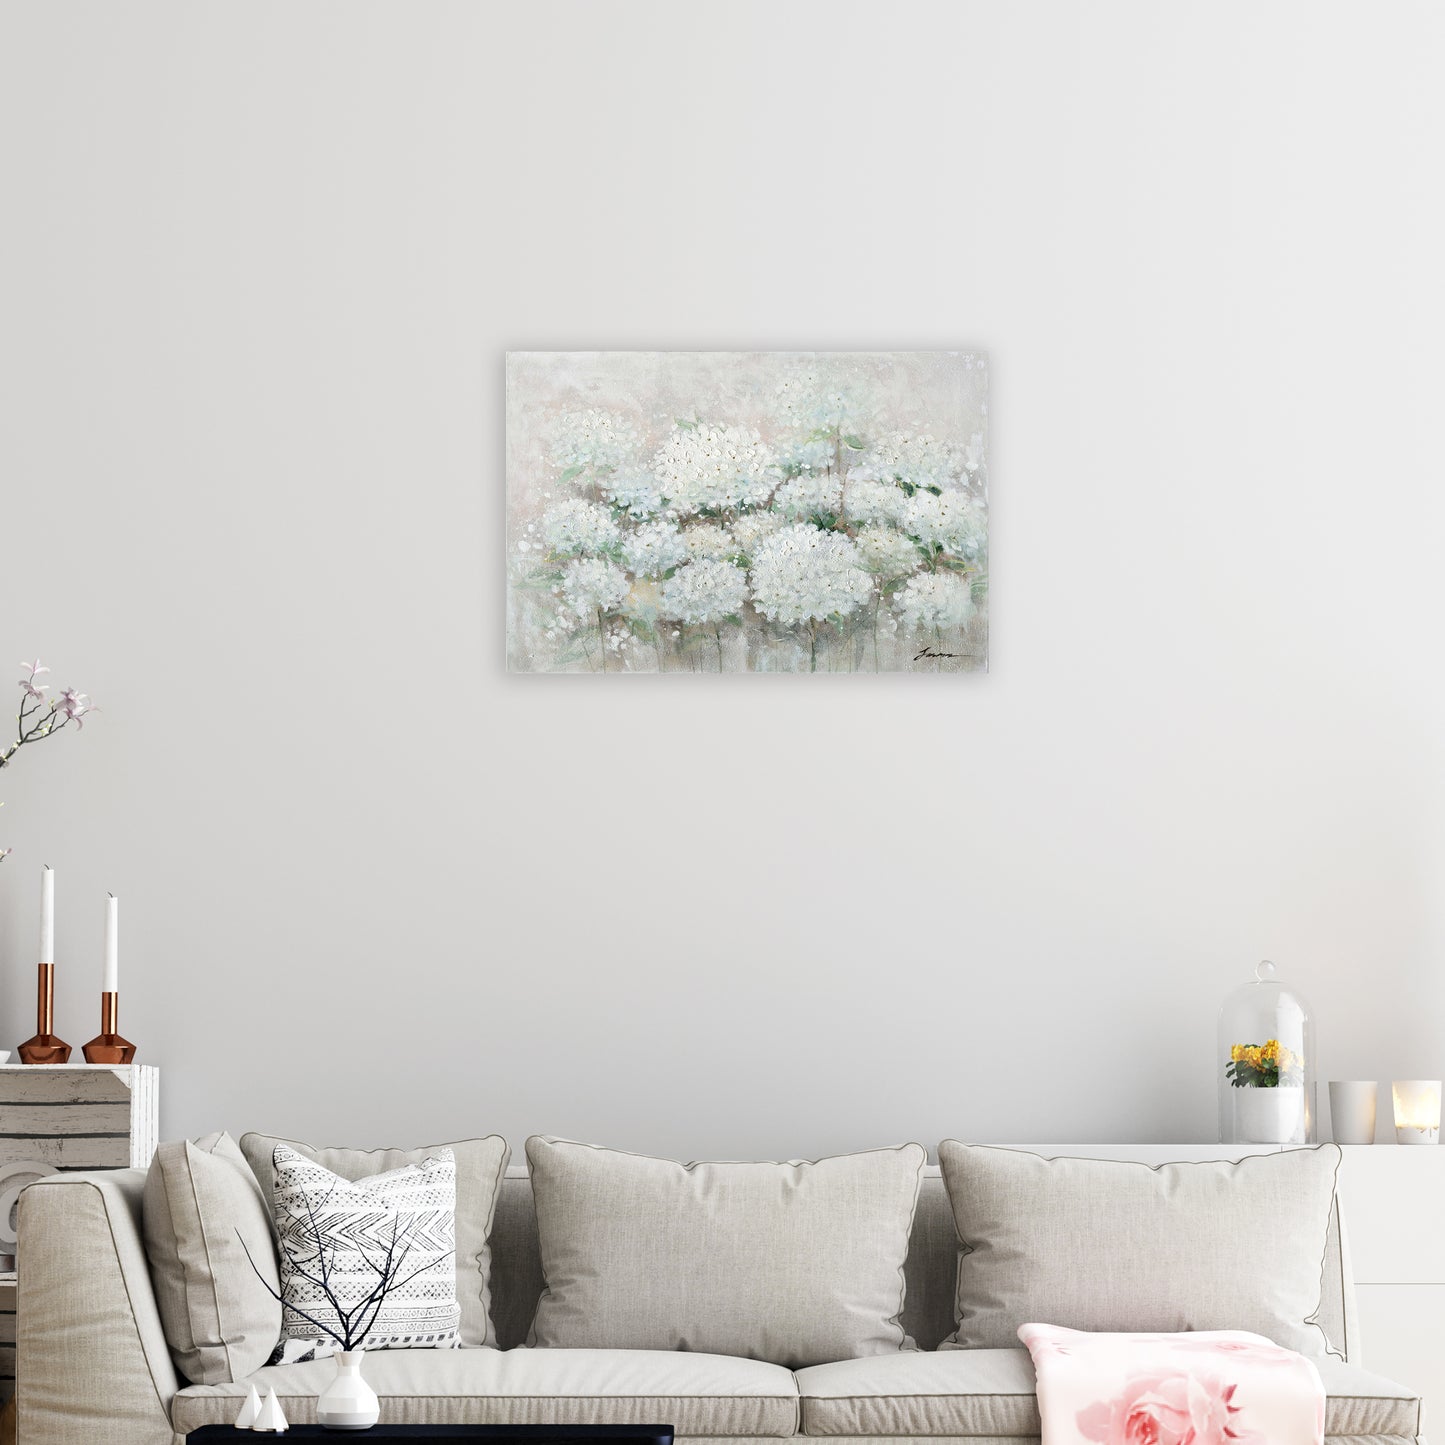 Sea Of Flowers Oil Painting on Wrapped Canvas Wall Art for living room, bedroom, office